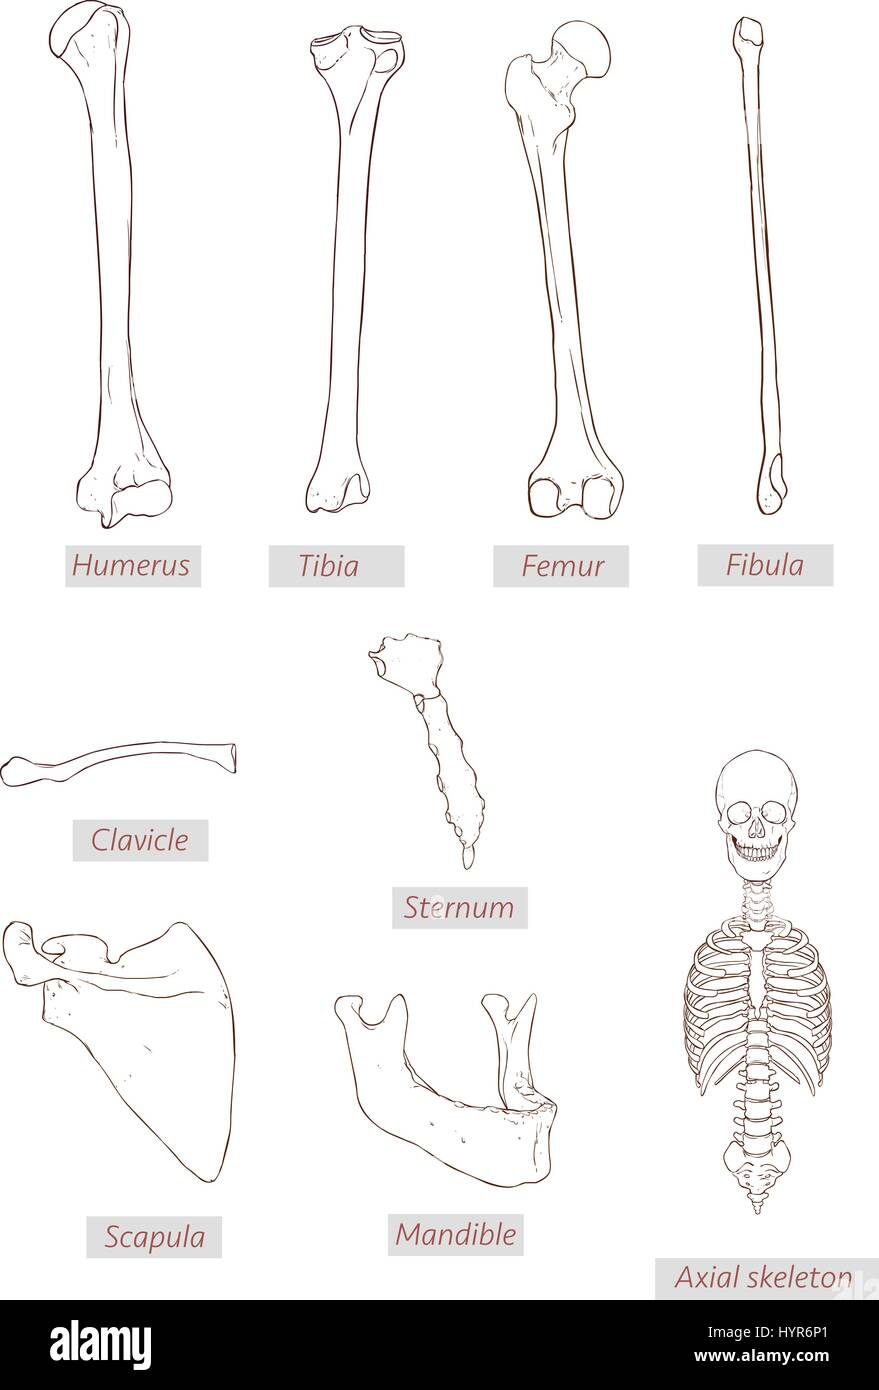 humerus,tibia,femur,fibula,clavicle,sternum,scapula,mandible,axial skeleton detailed medical illustrations .Latin medical terms. Isolated on a white b Stock Vector